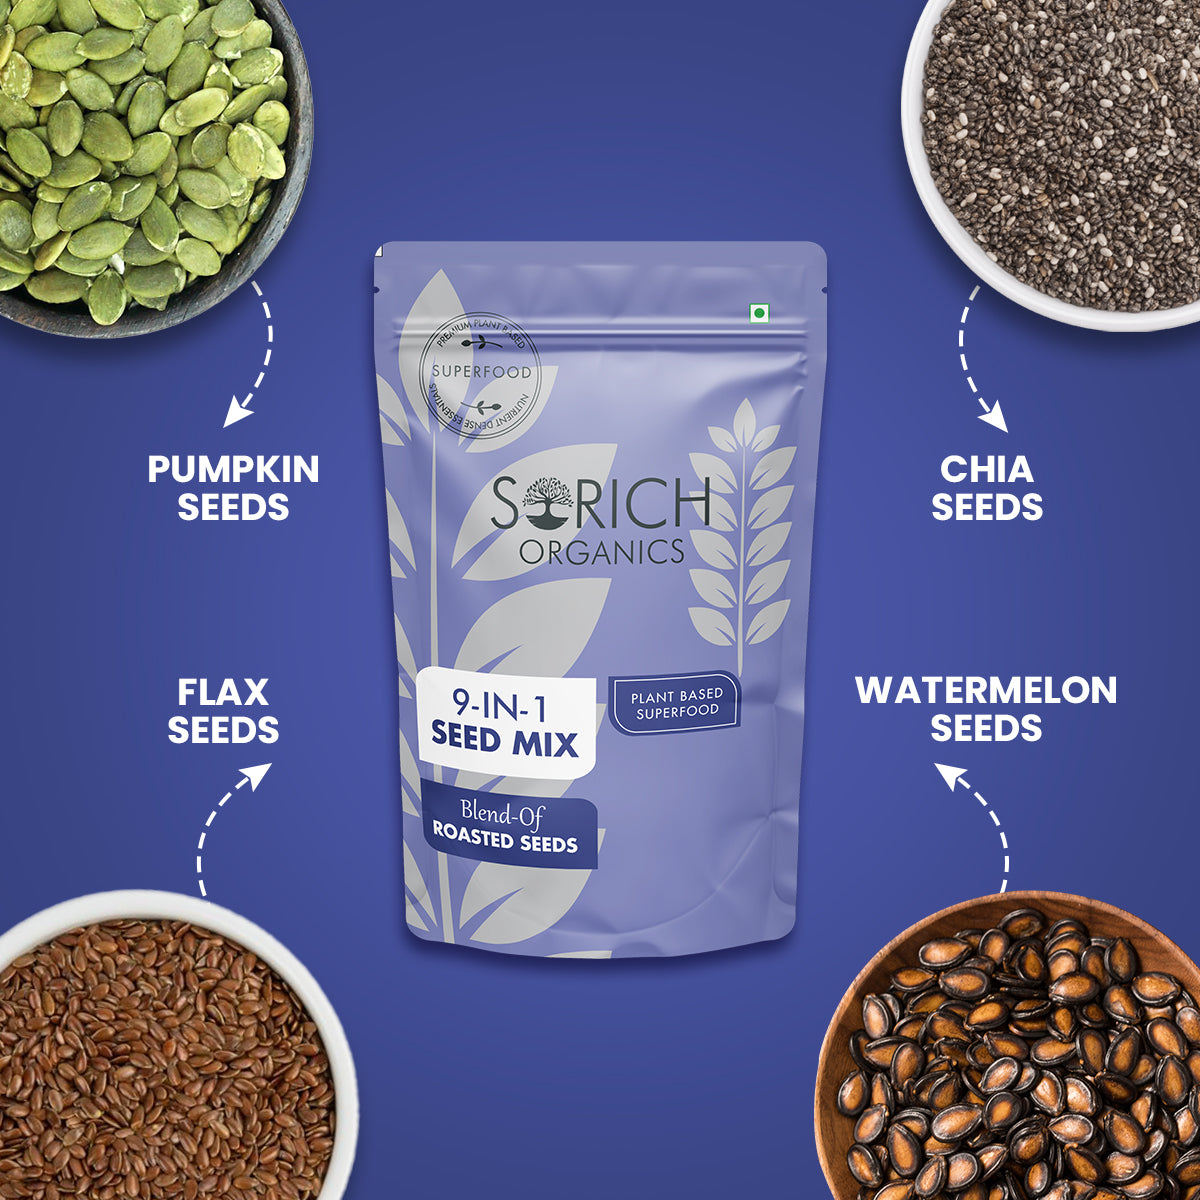 9 in 1 Seeds Mix - Sorich